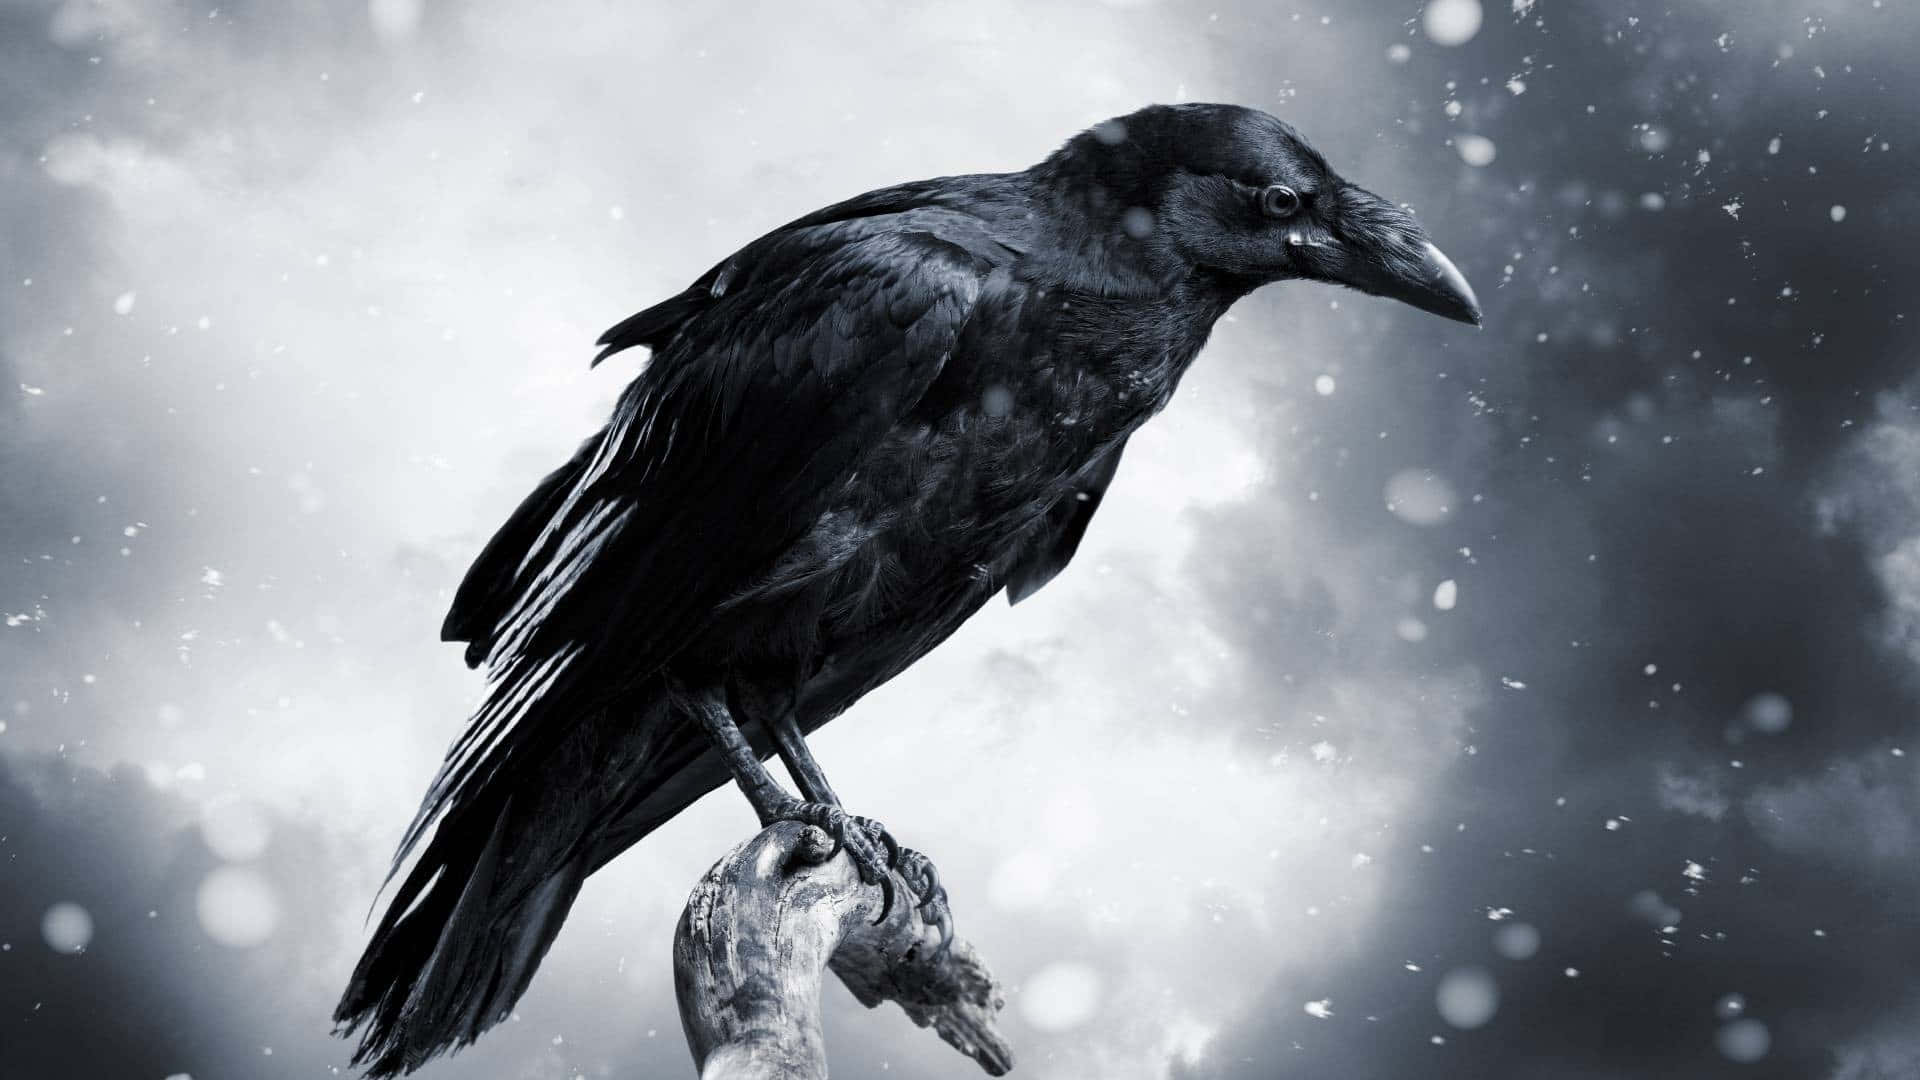 “A mysterious raven perched high in a tree, watching the world go by.”